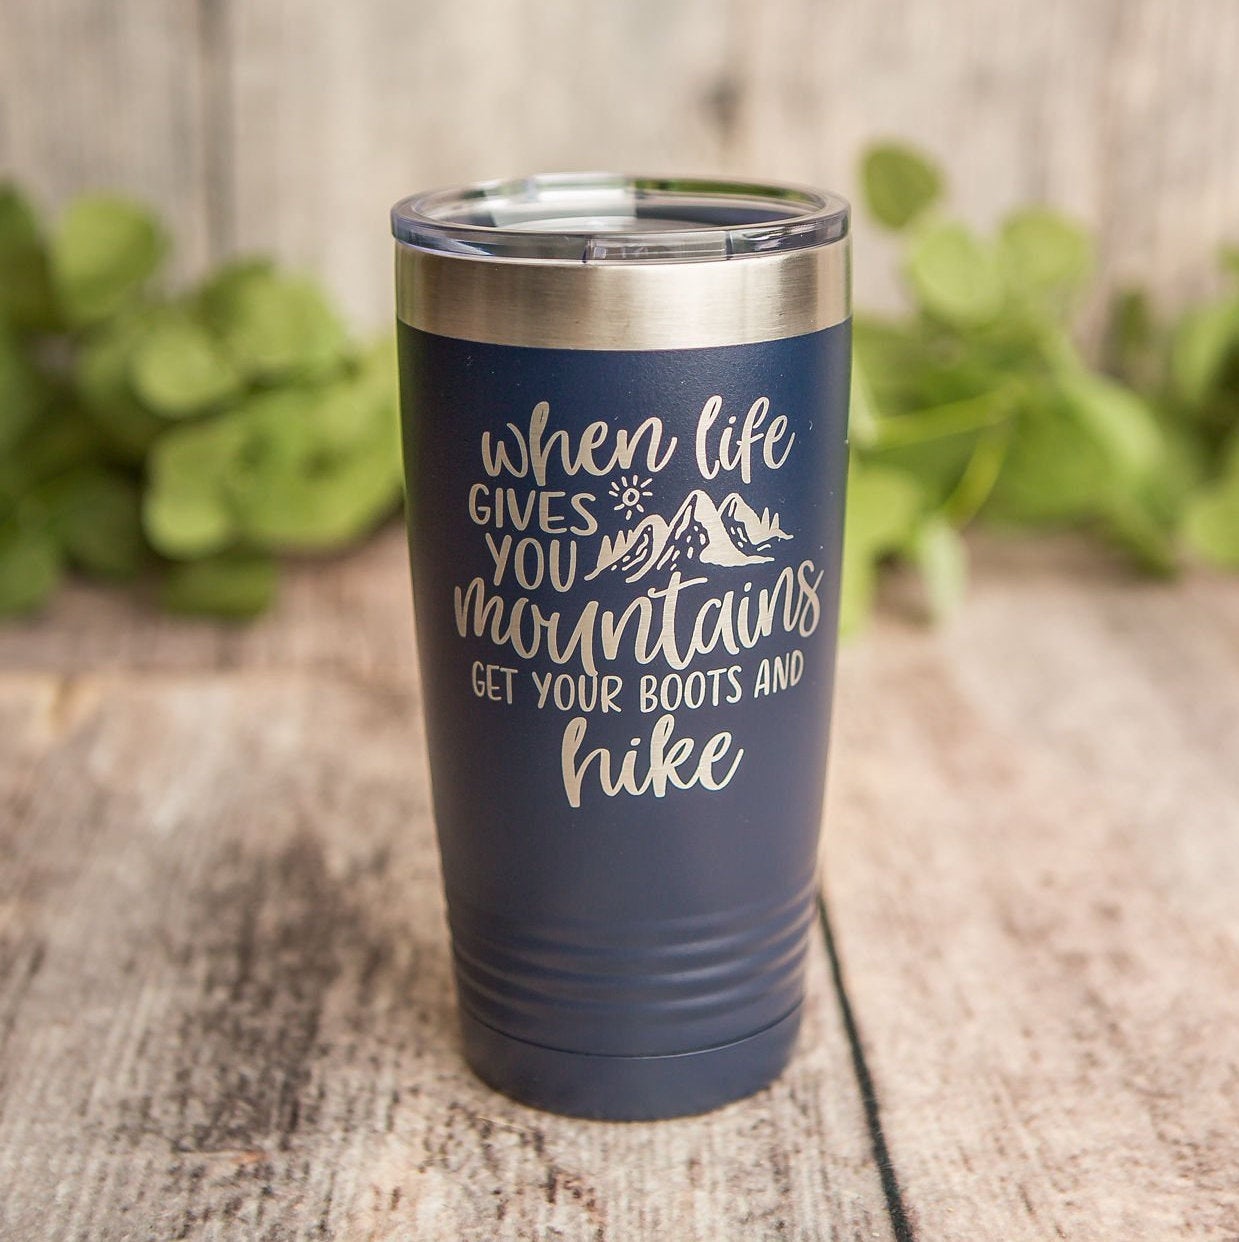 https://3cetching.com/wp-content/uploads/2020/09/when-life-gives-you-mountains-get-your-boots-and-hike-engraved-polar-camel-stainless-steel-tumbler-nature-mug-5f5fc467.jpg